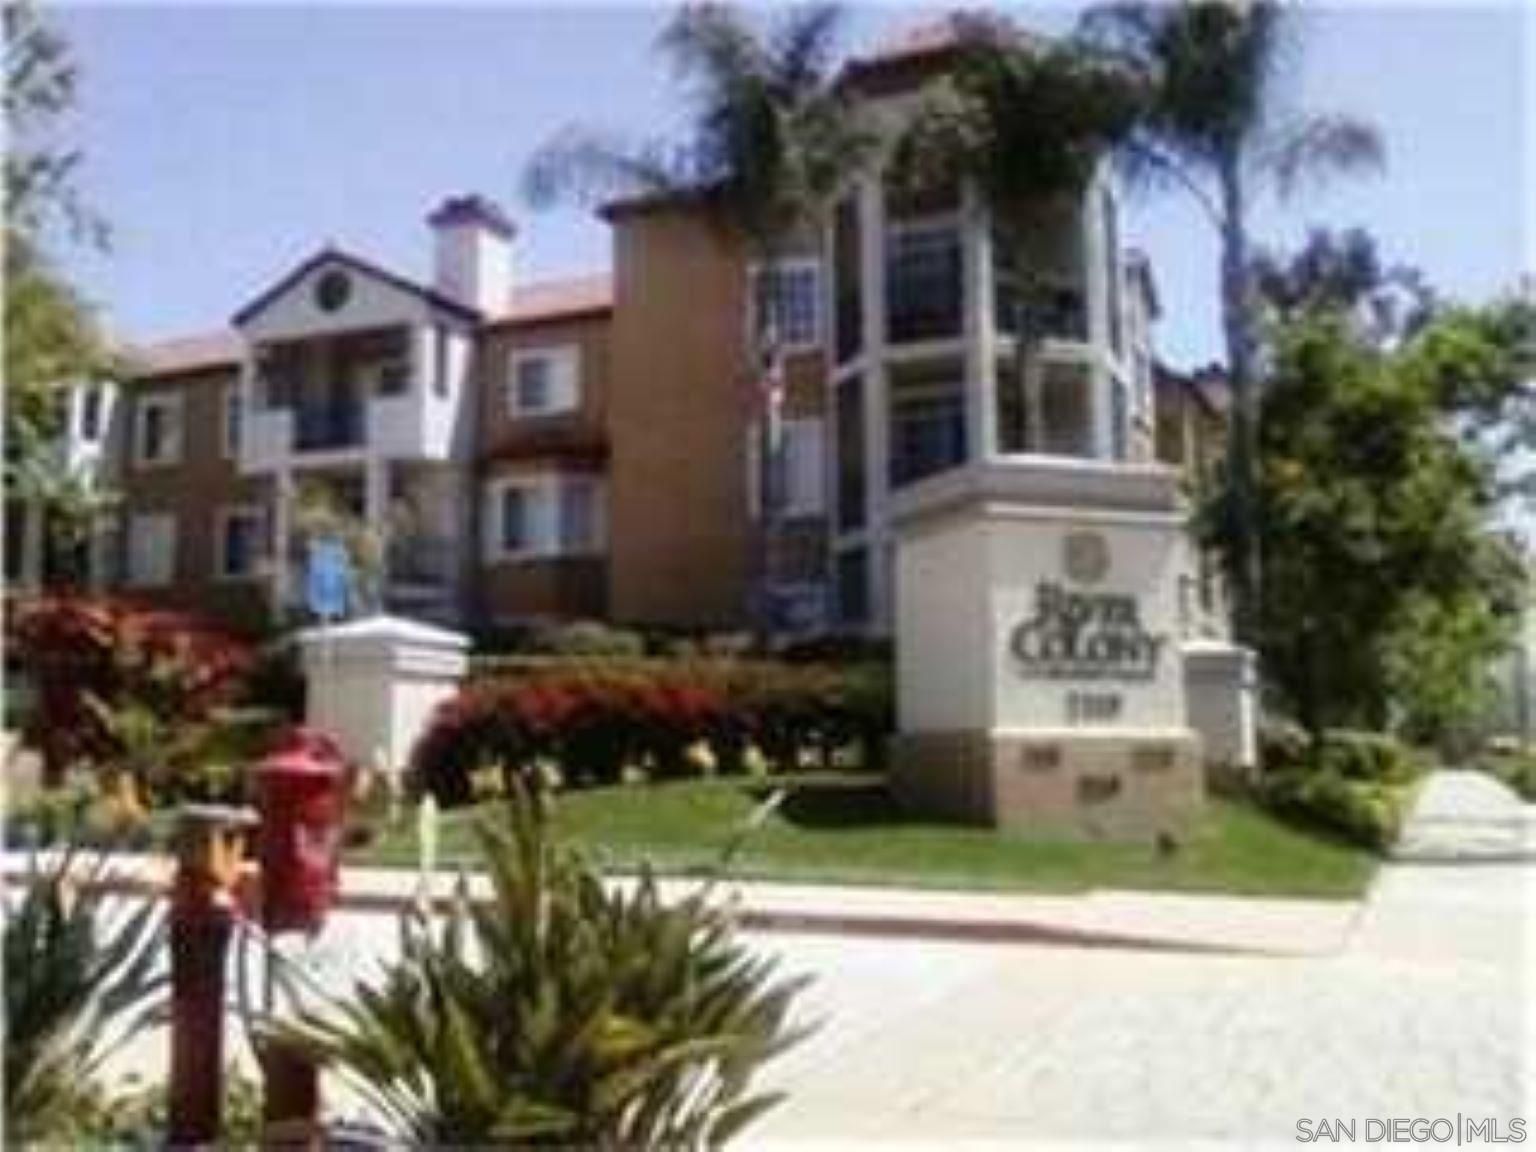 I have sold a property at 2202 2020 Camino De La Reina in San Diego
